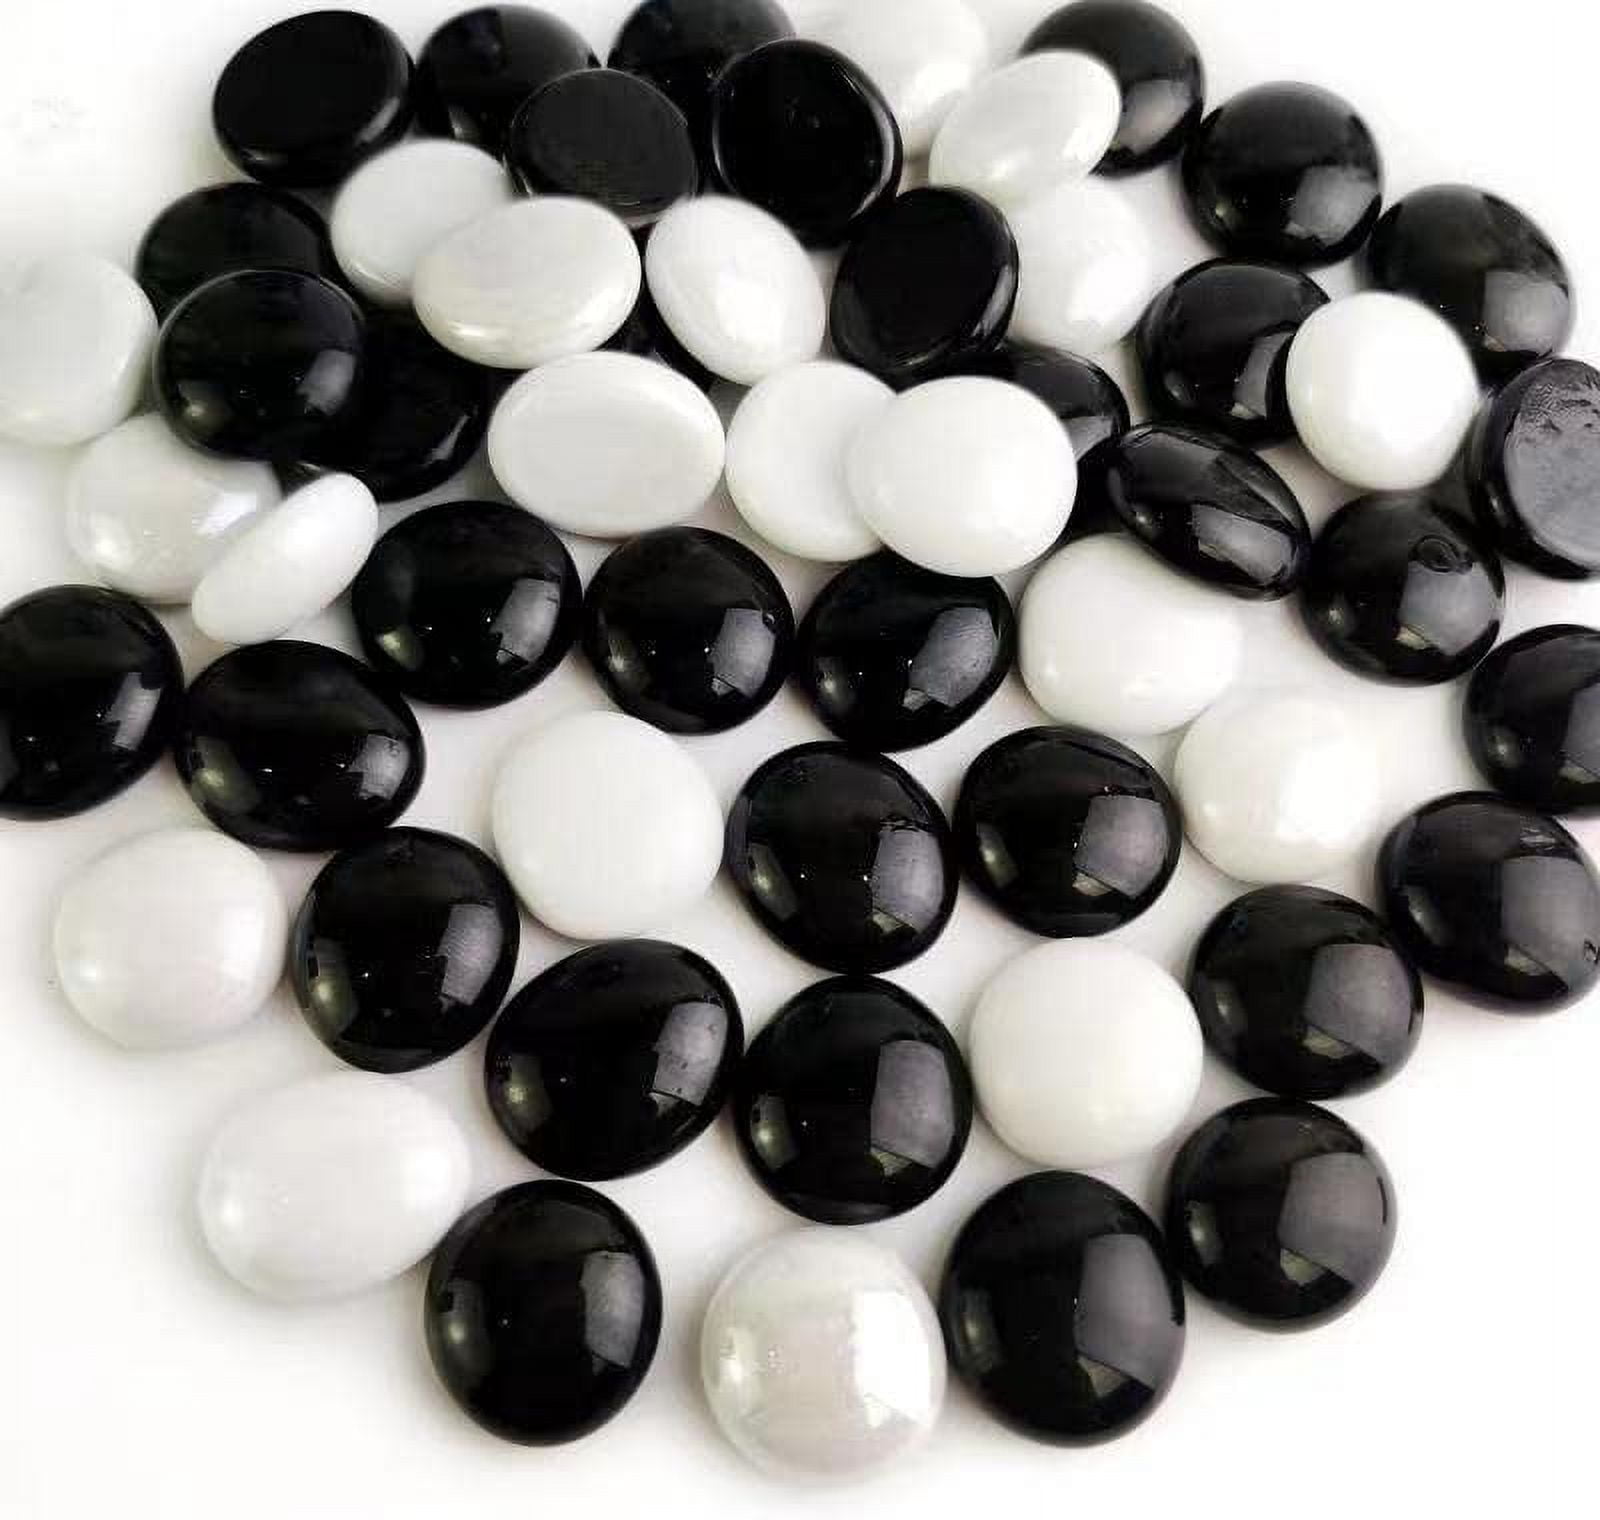 YIYA Brown-Black Flat Marble Decorative Beads Glass Gems for Home  Decoration